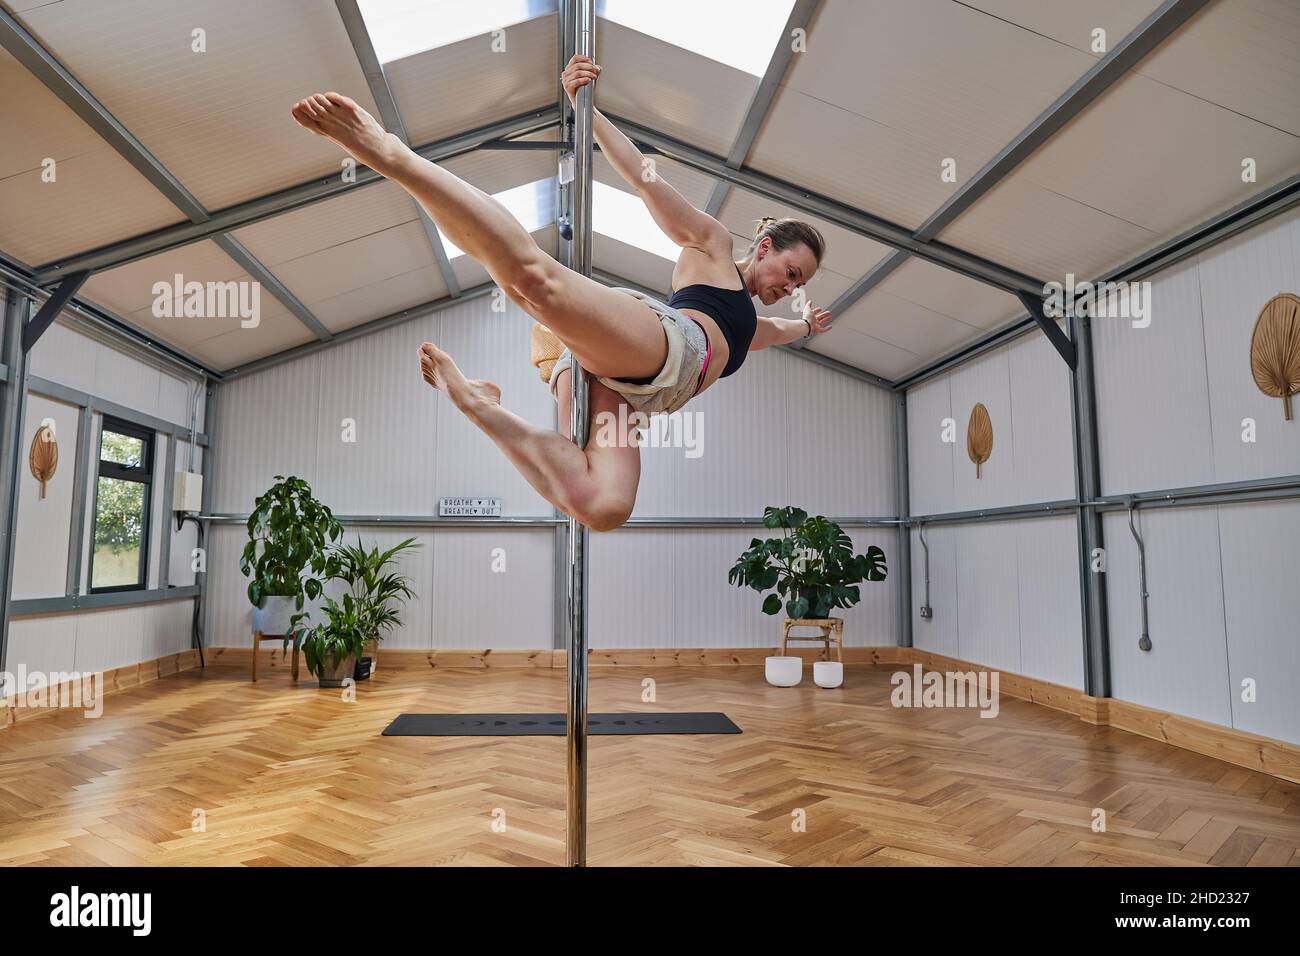 large pole dance studio with dancing instructura suspended in the air. Stock Photo